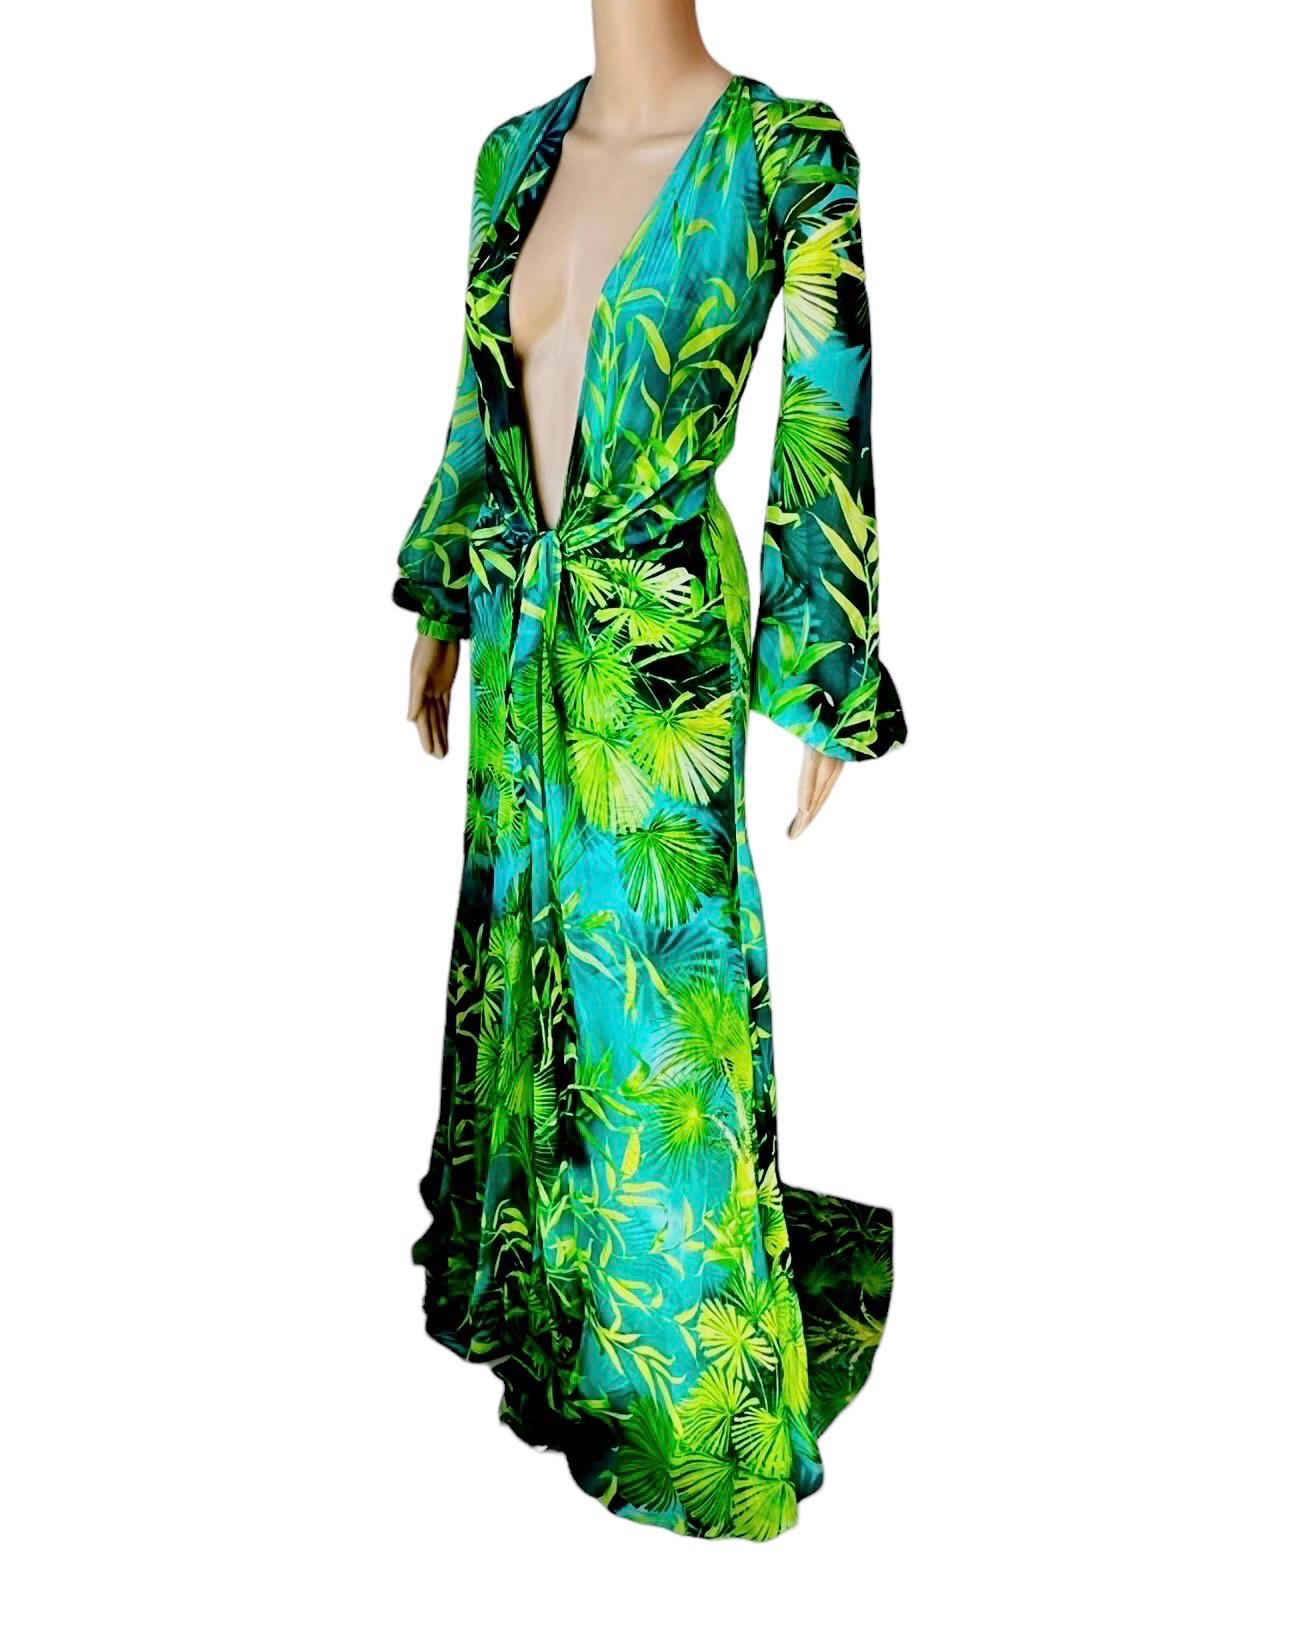 Versace S/S 2020 Cutout Tropical Jungle Print Bodysuit & Evening Dress Gown 2 Piece Set

Versace 2 Piece set featuring removable satin bodysuit with hook and eye closures at bottom, plunging neckline, cutout detail at shoulders, barrel cuffs with